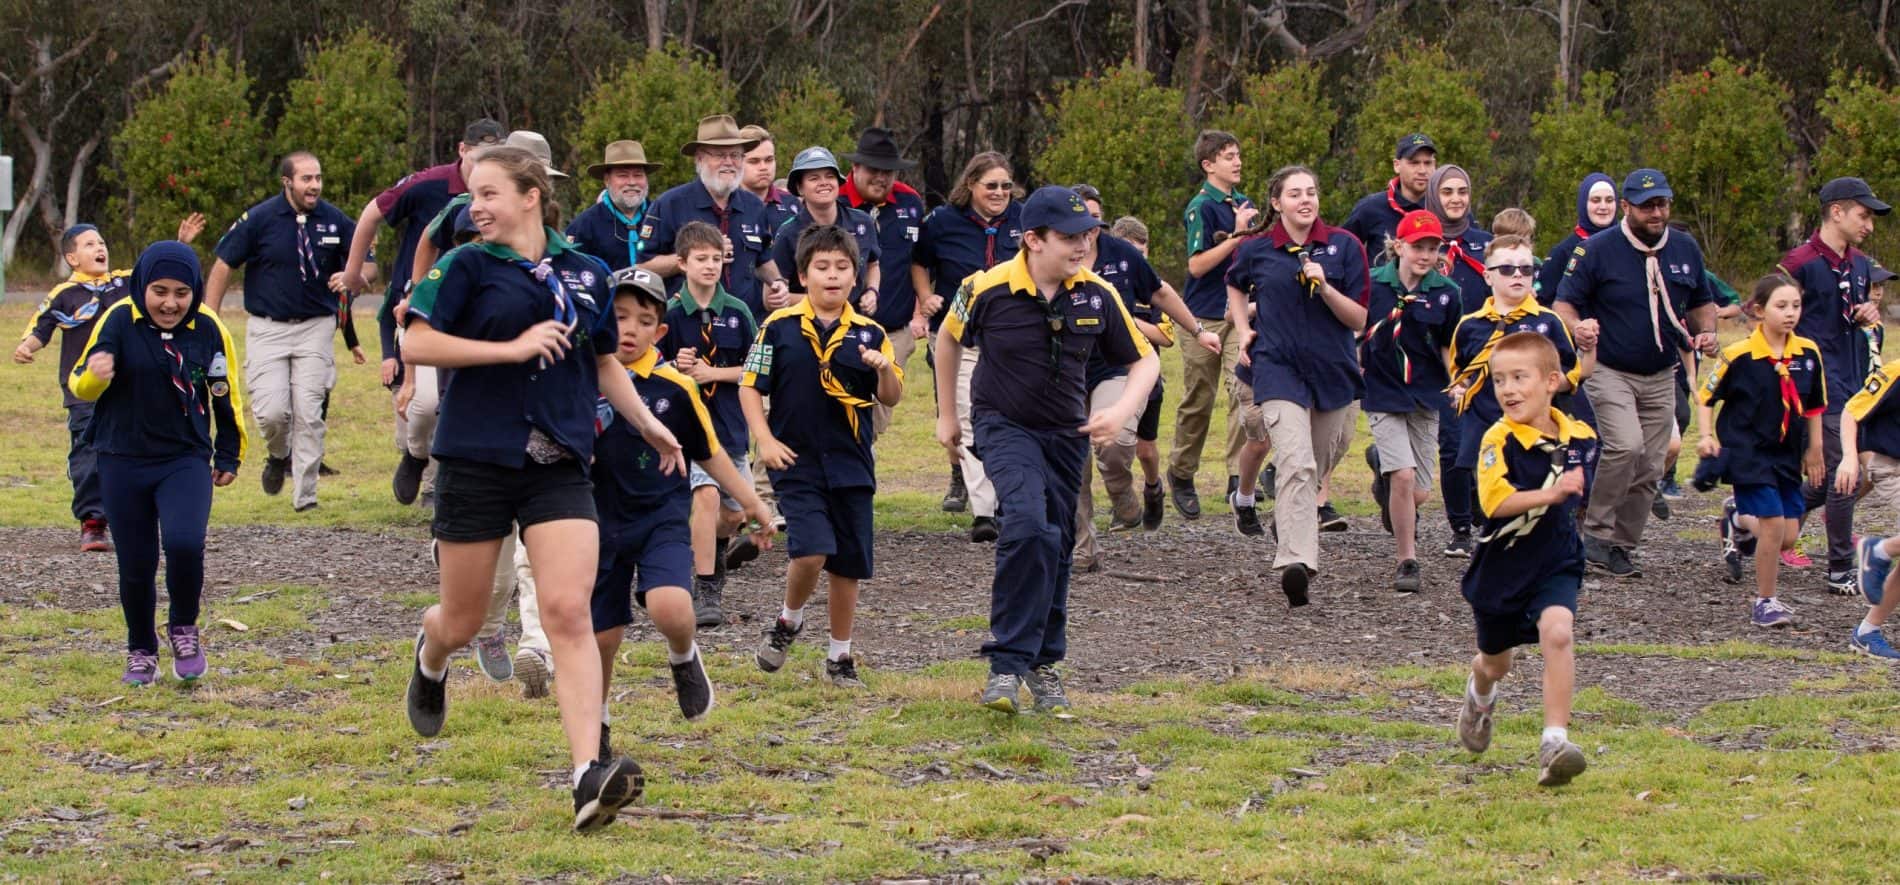 Group of Scouts running together